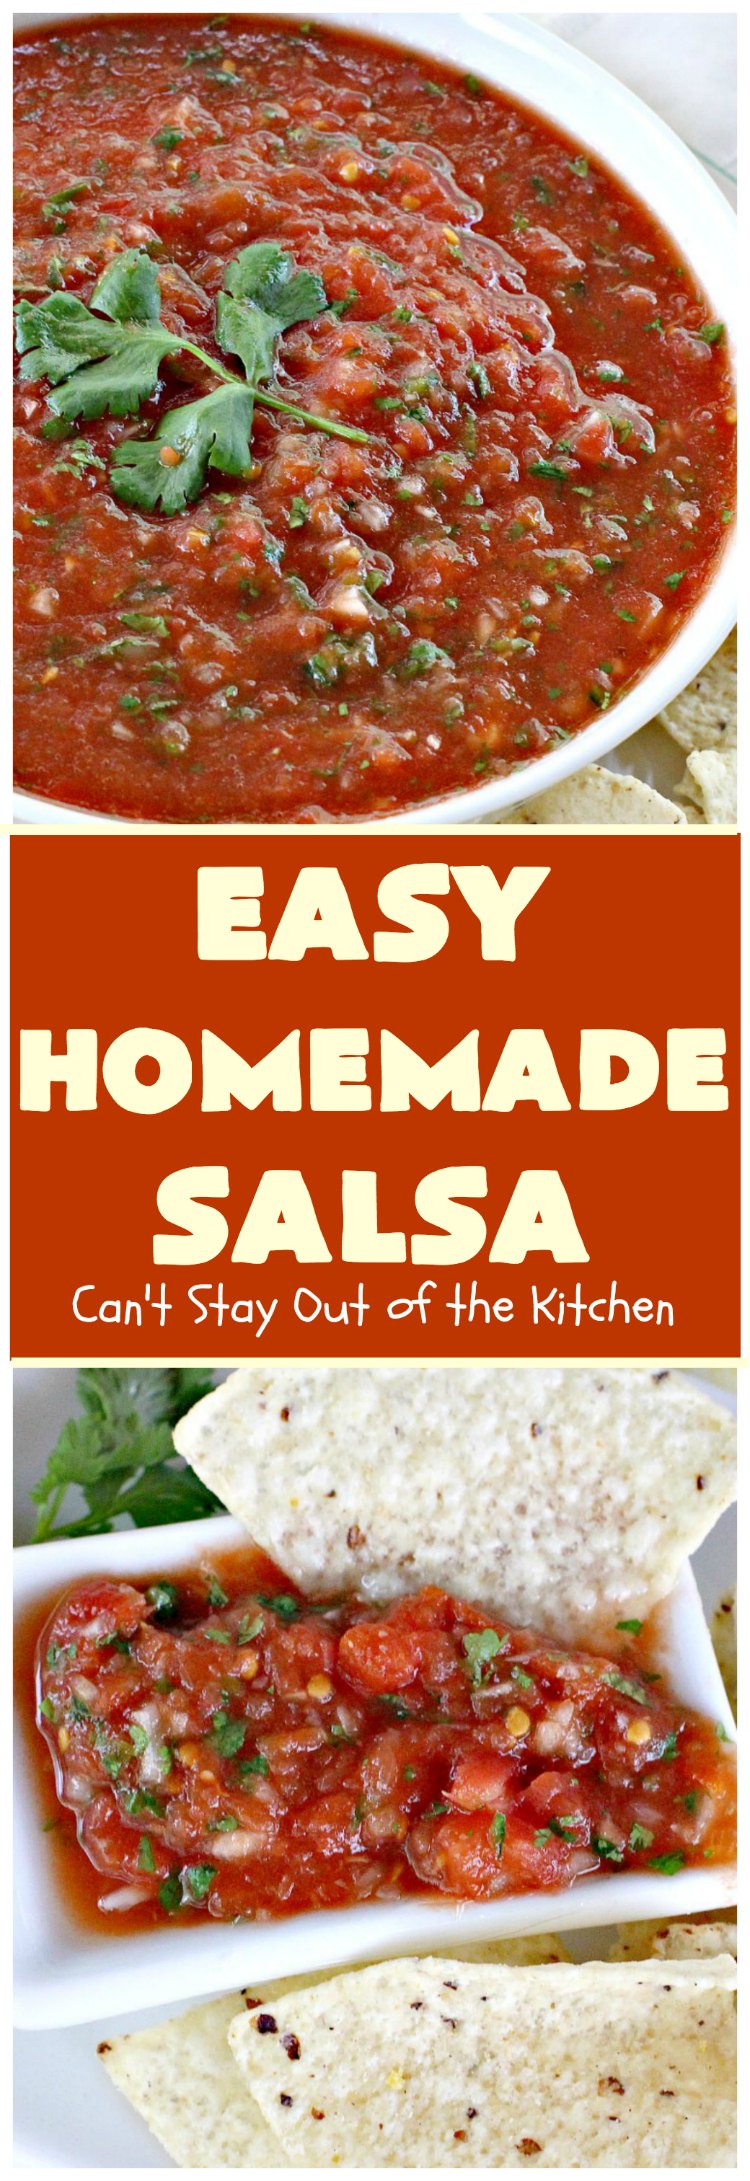 Easy Homemade Salsa | Can't Stay Out of the KitchenEasy Homemade Salsa | Can't Stay Out of the Kitchen